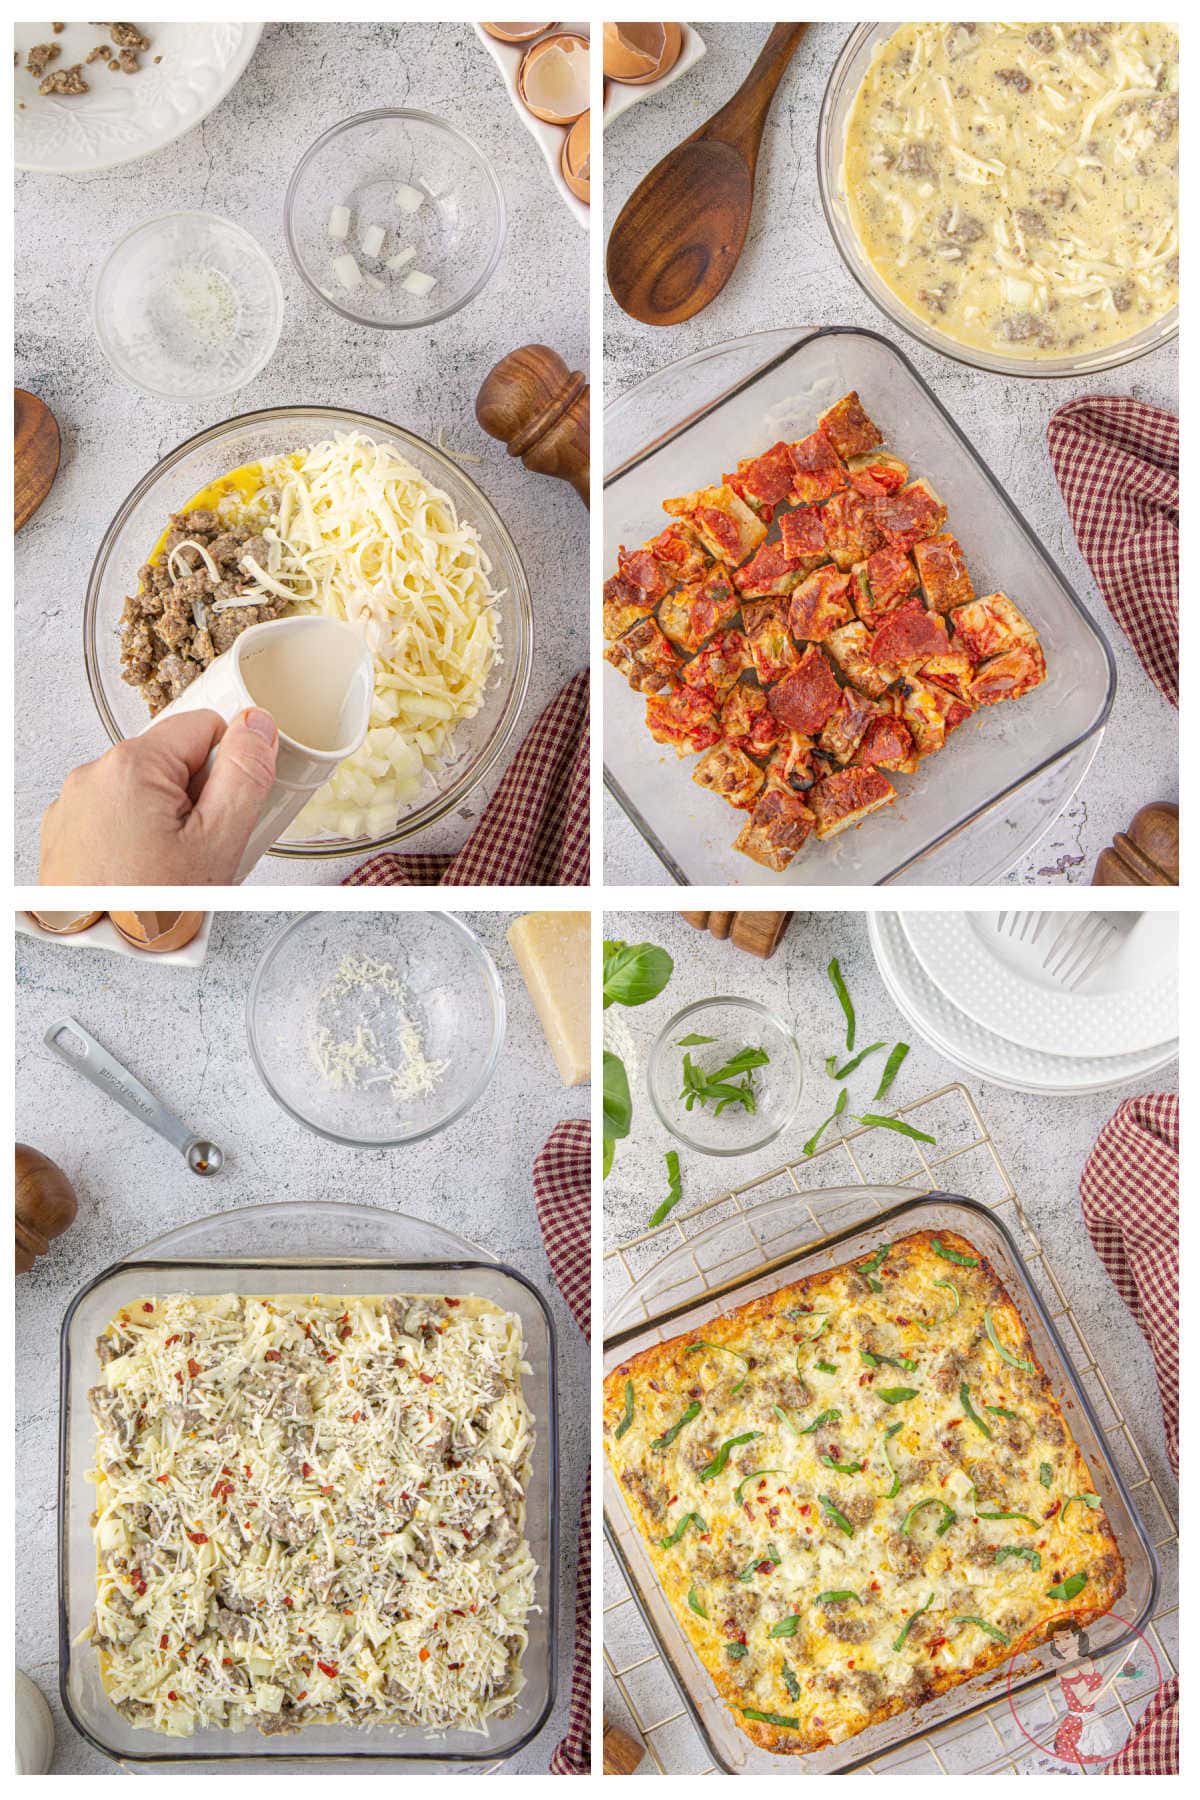 Step by step images showing how to make this casserole.